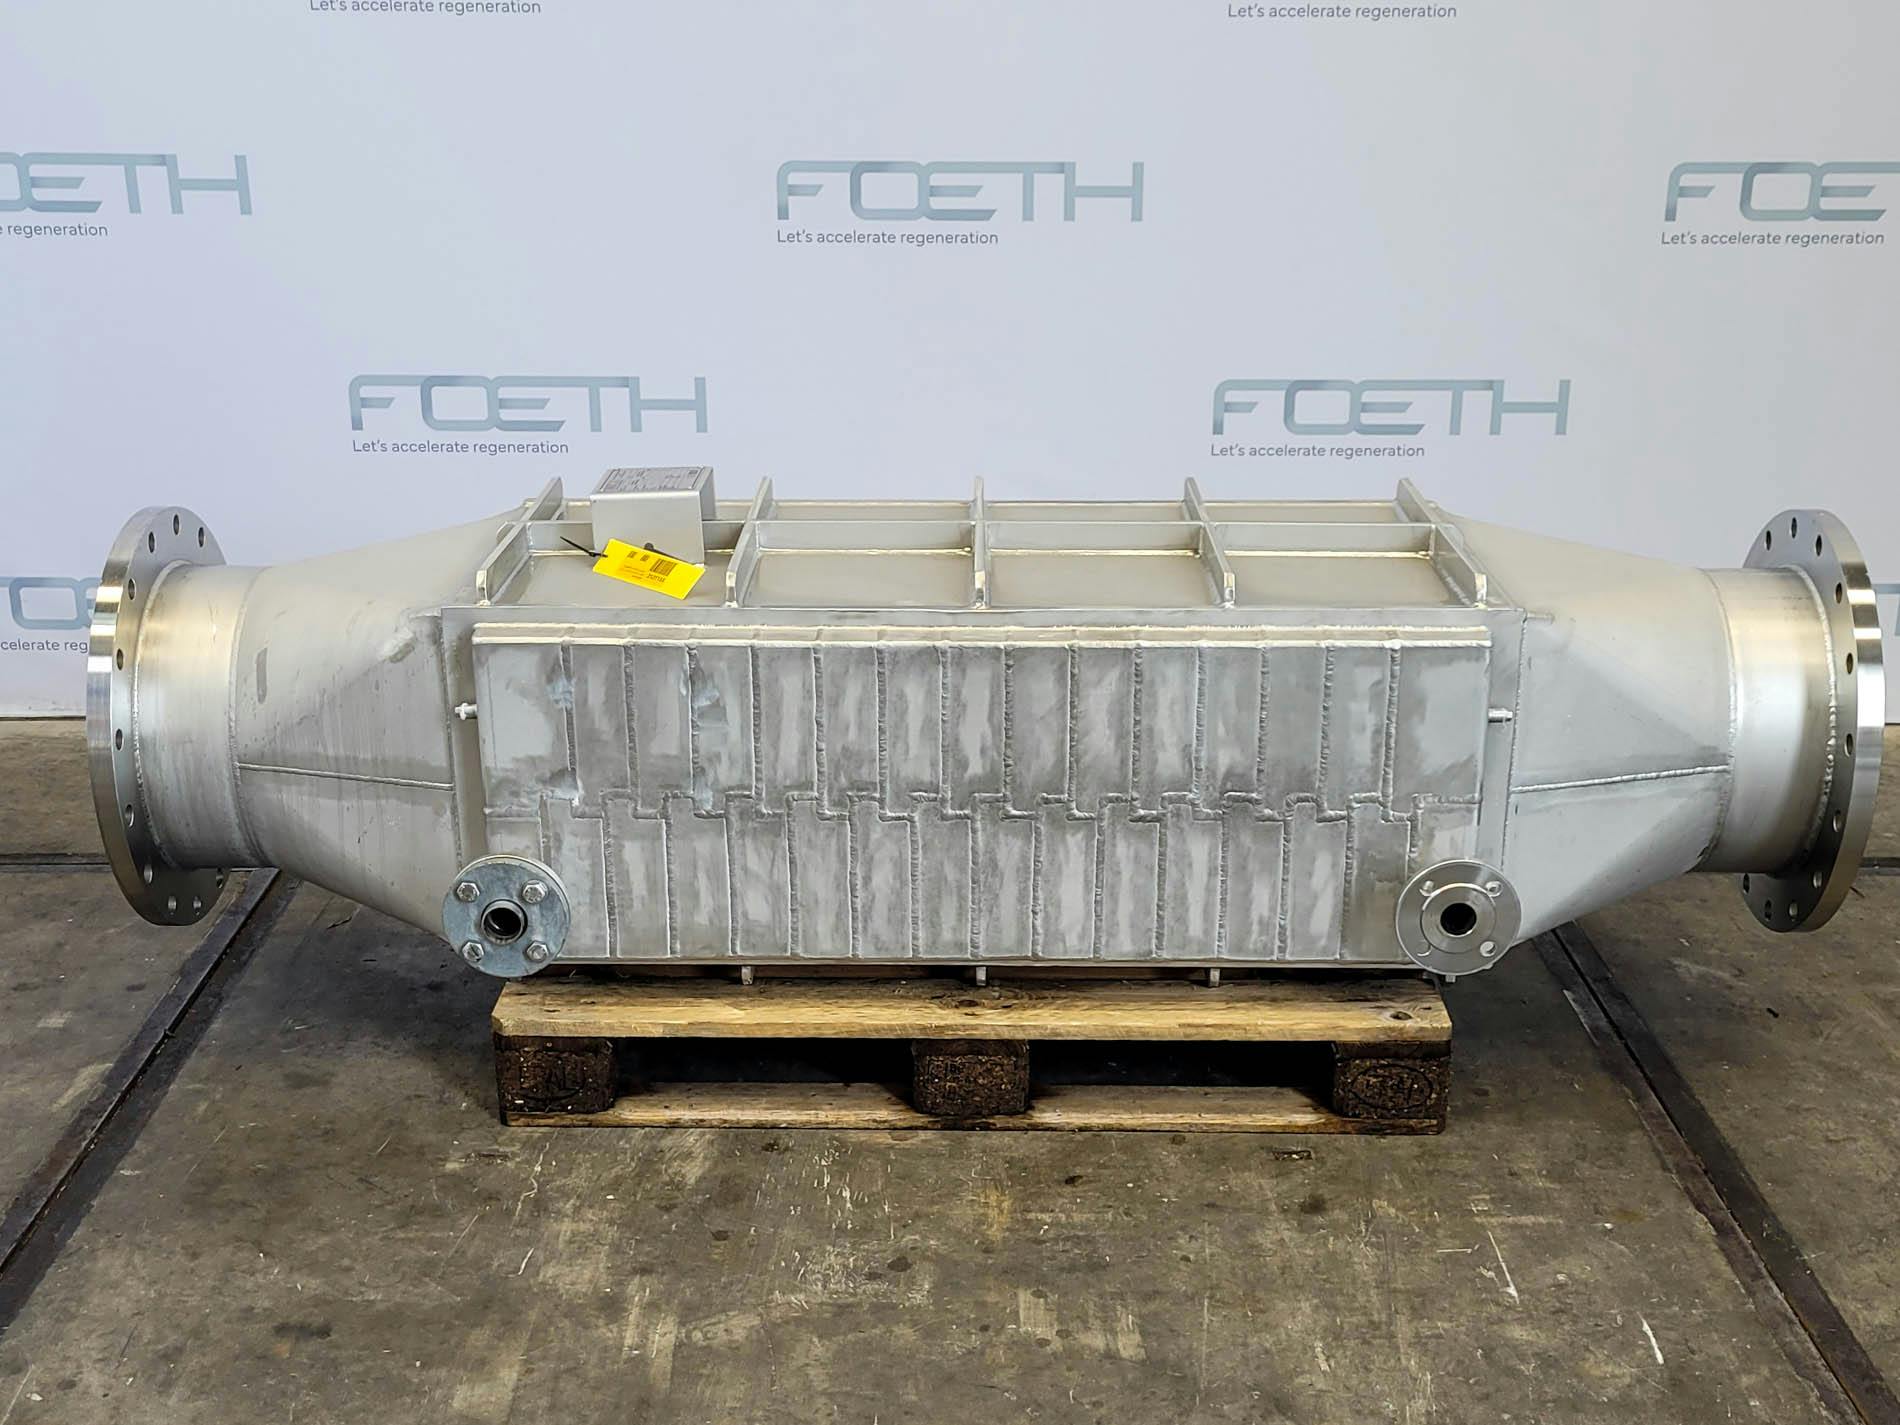 Enco "Finned / Rippenrohr" - Shell and tube heat exchanger - image 1